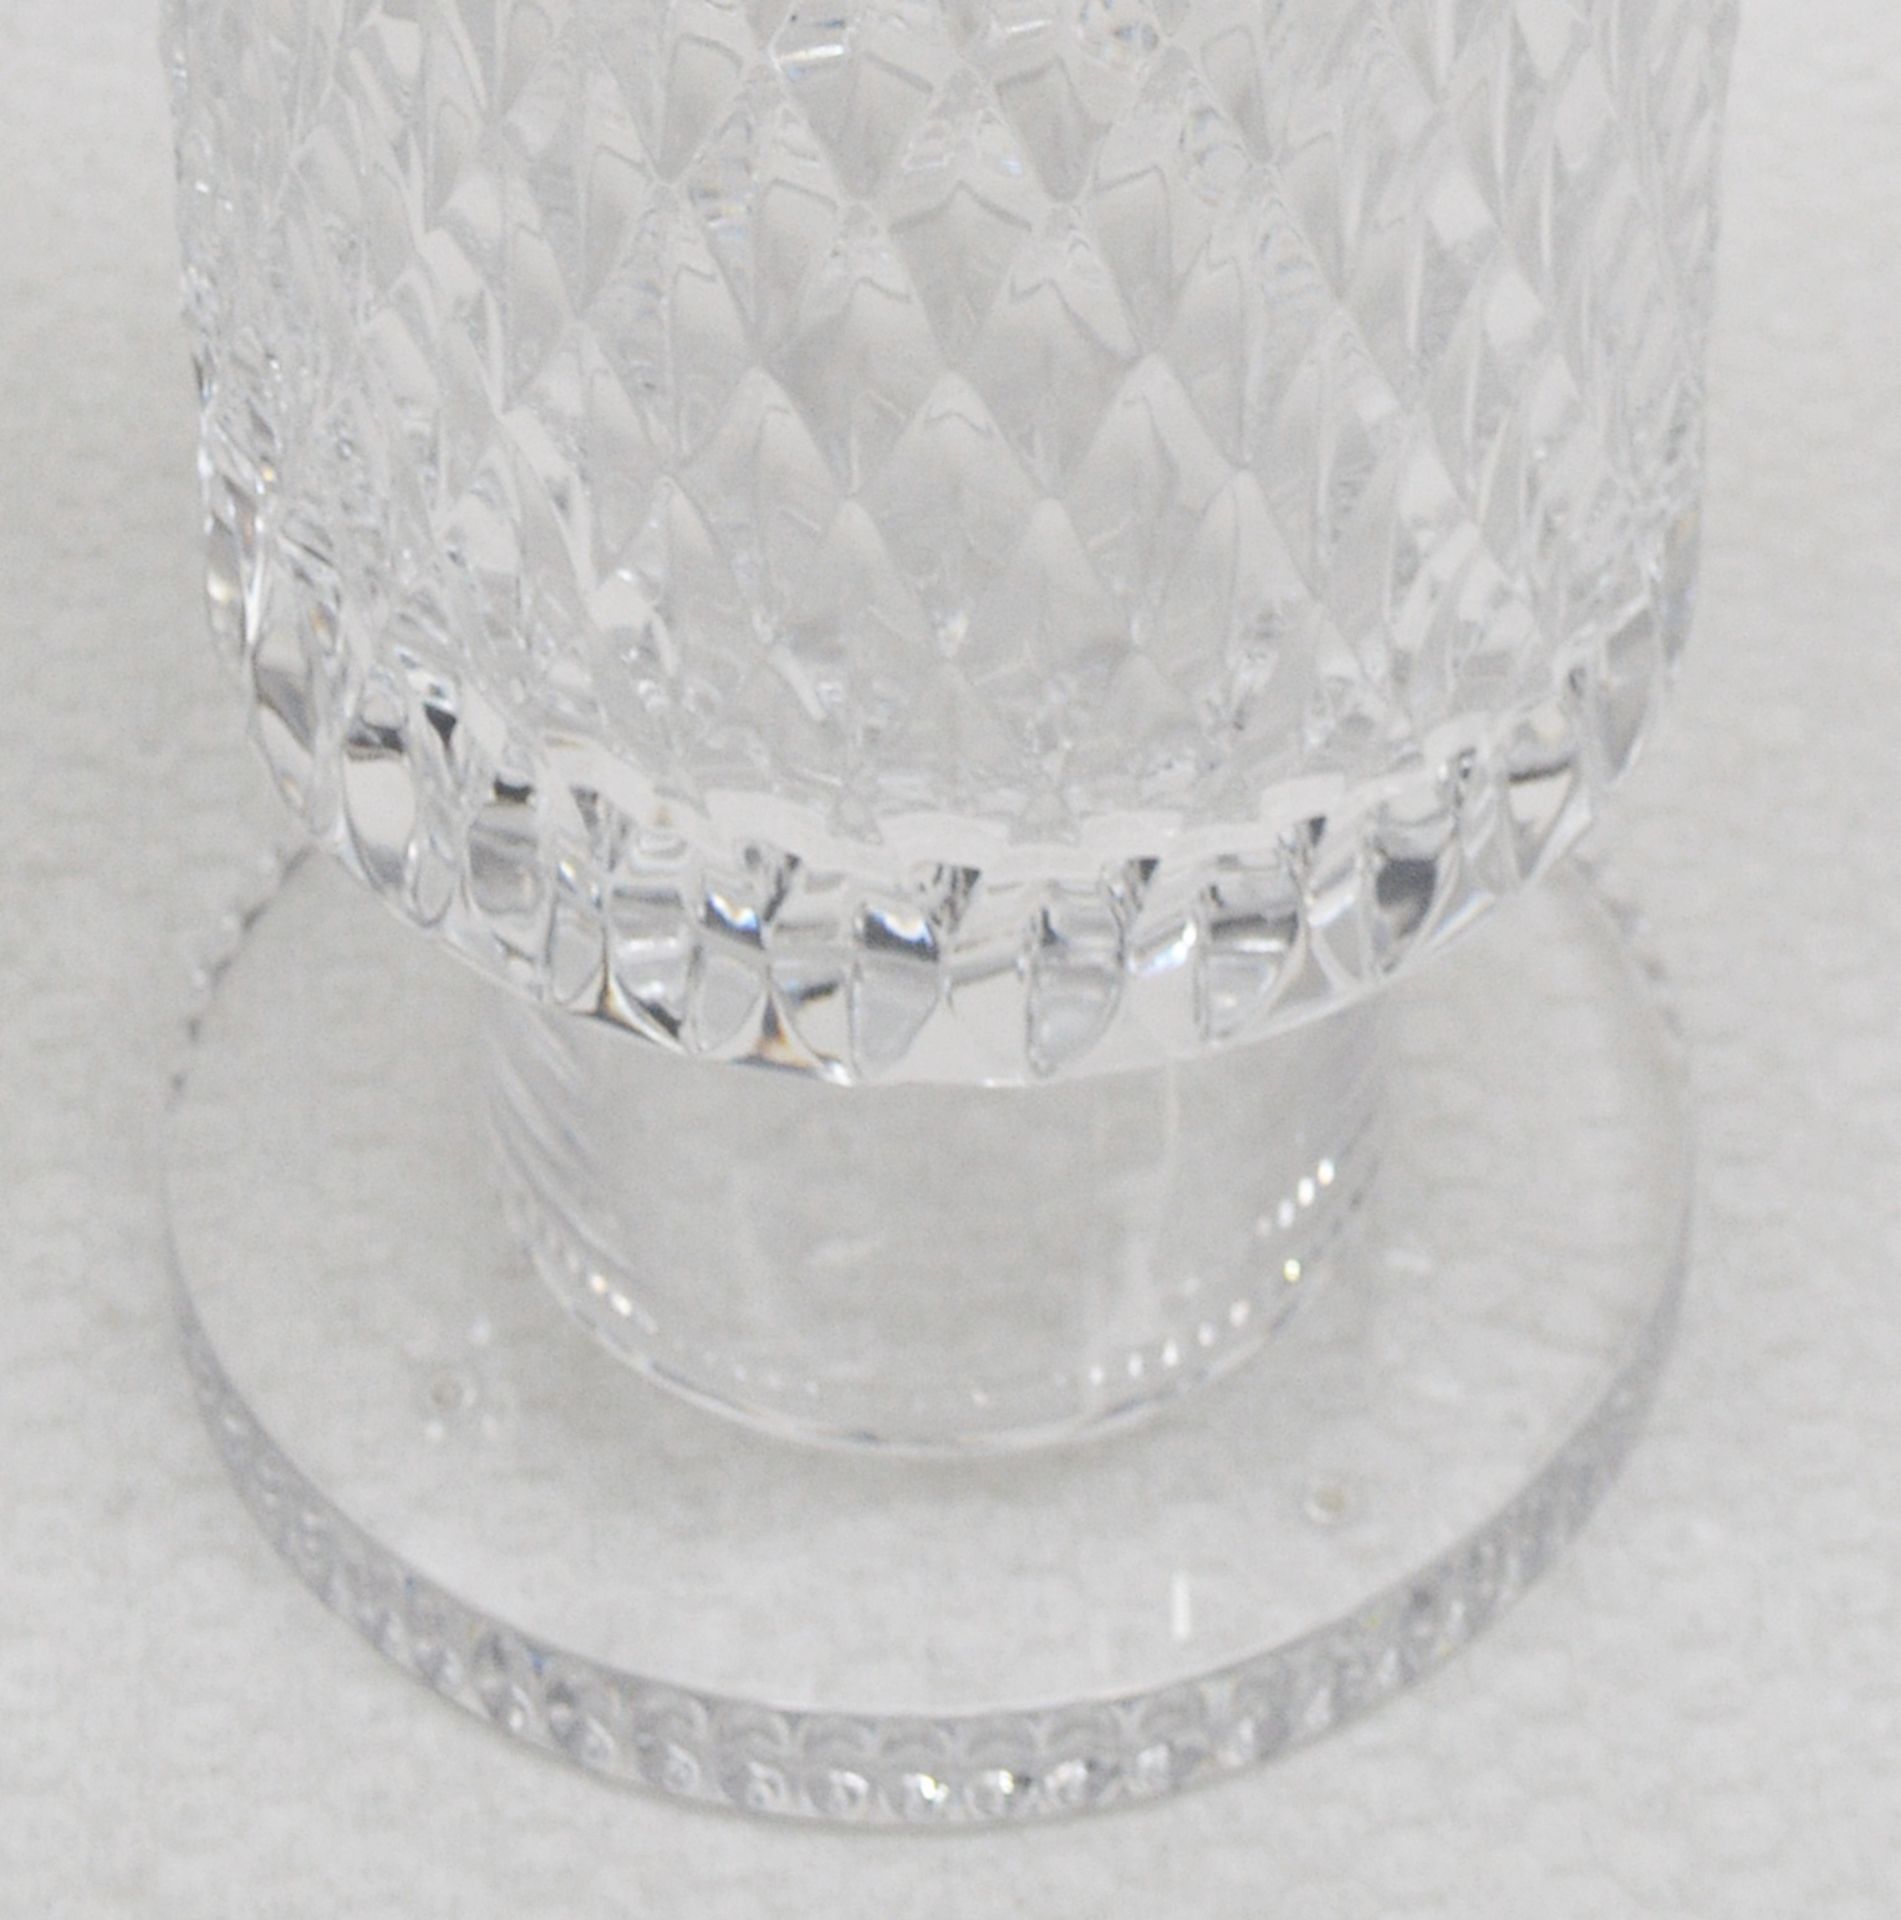 1 x BALDI 'Home Jewels' Italian Hand-crafted Artisan Clear Crystal Vase - Unboxed Ex-display Item - Image 2 of 5